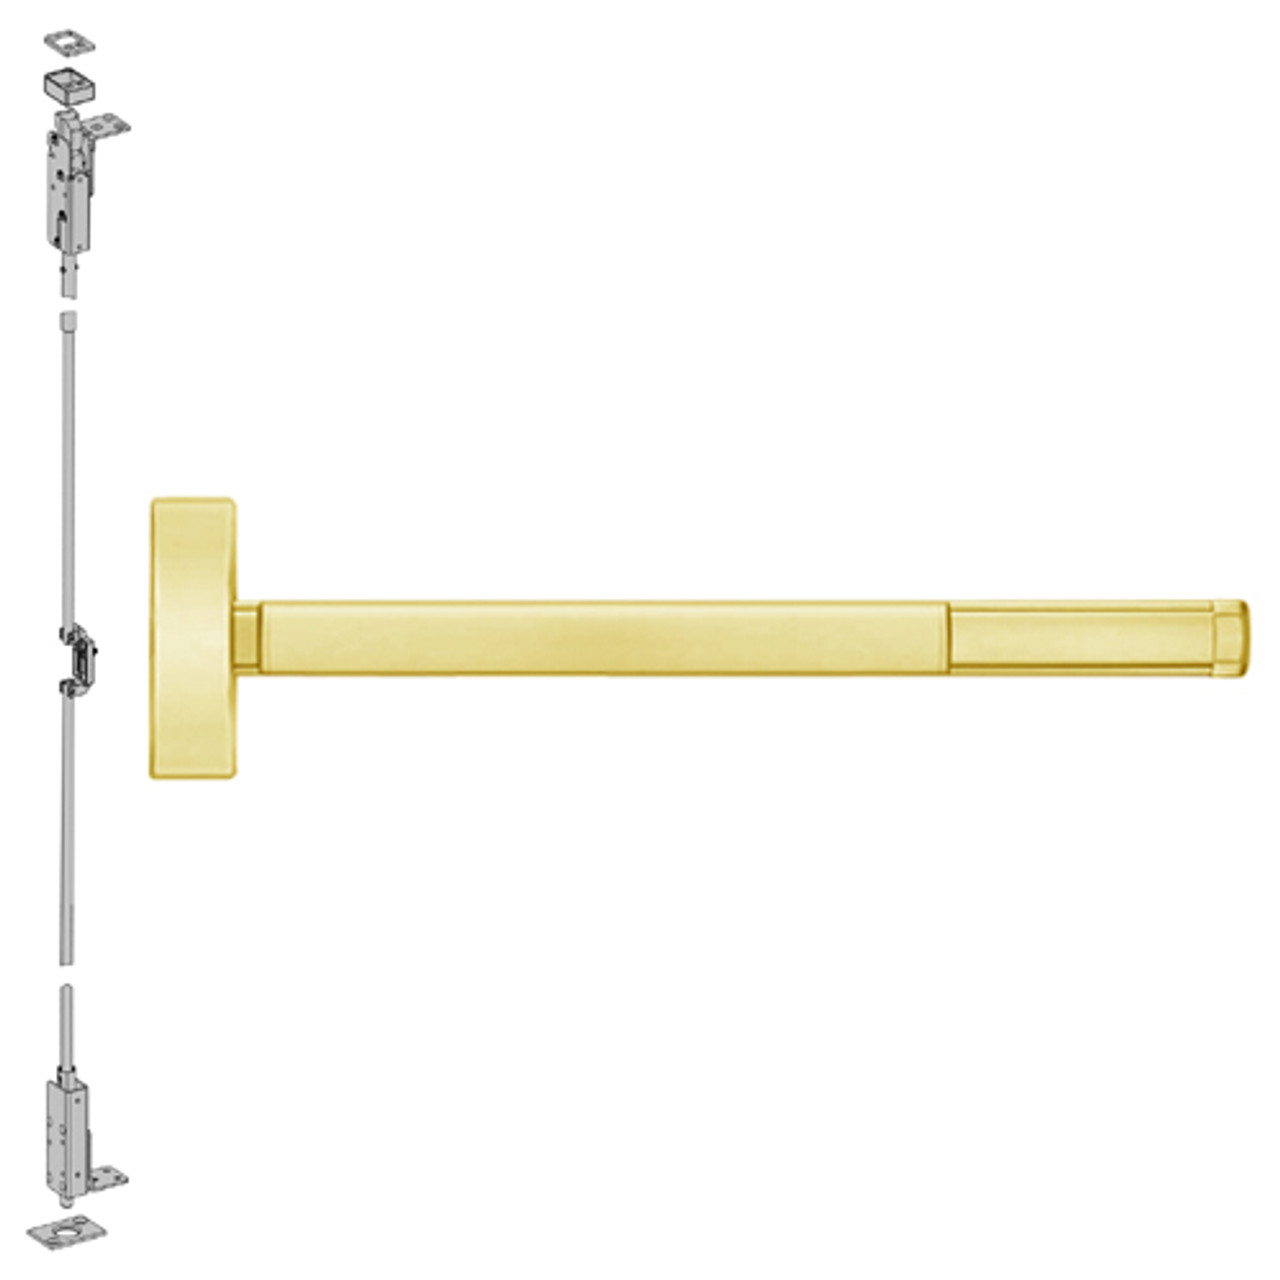 MLR2702-605-36 PHI 2700 Series Wood Door Concealed Vertical Exit Device with Motorized Latch Retraction Prepped for Dummy Trim in Bright Brass Finish